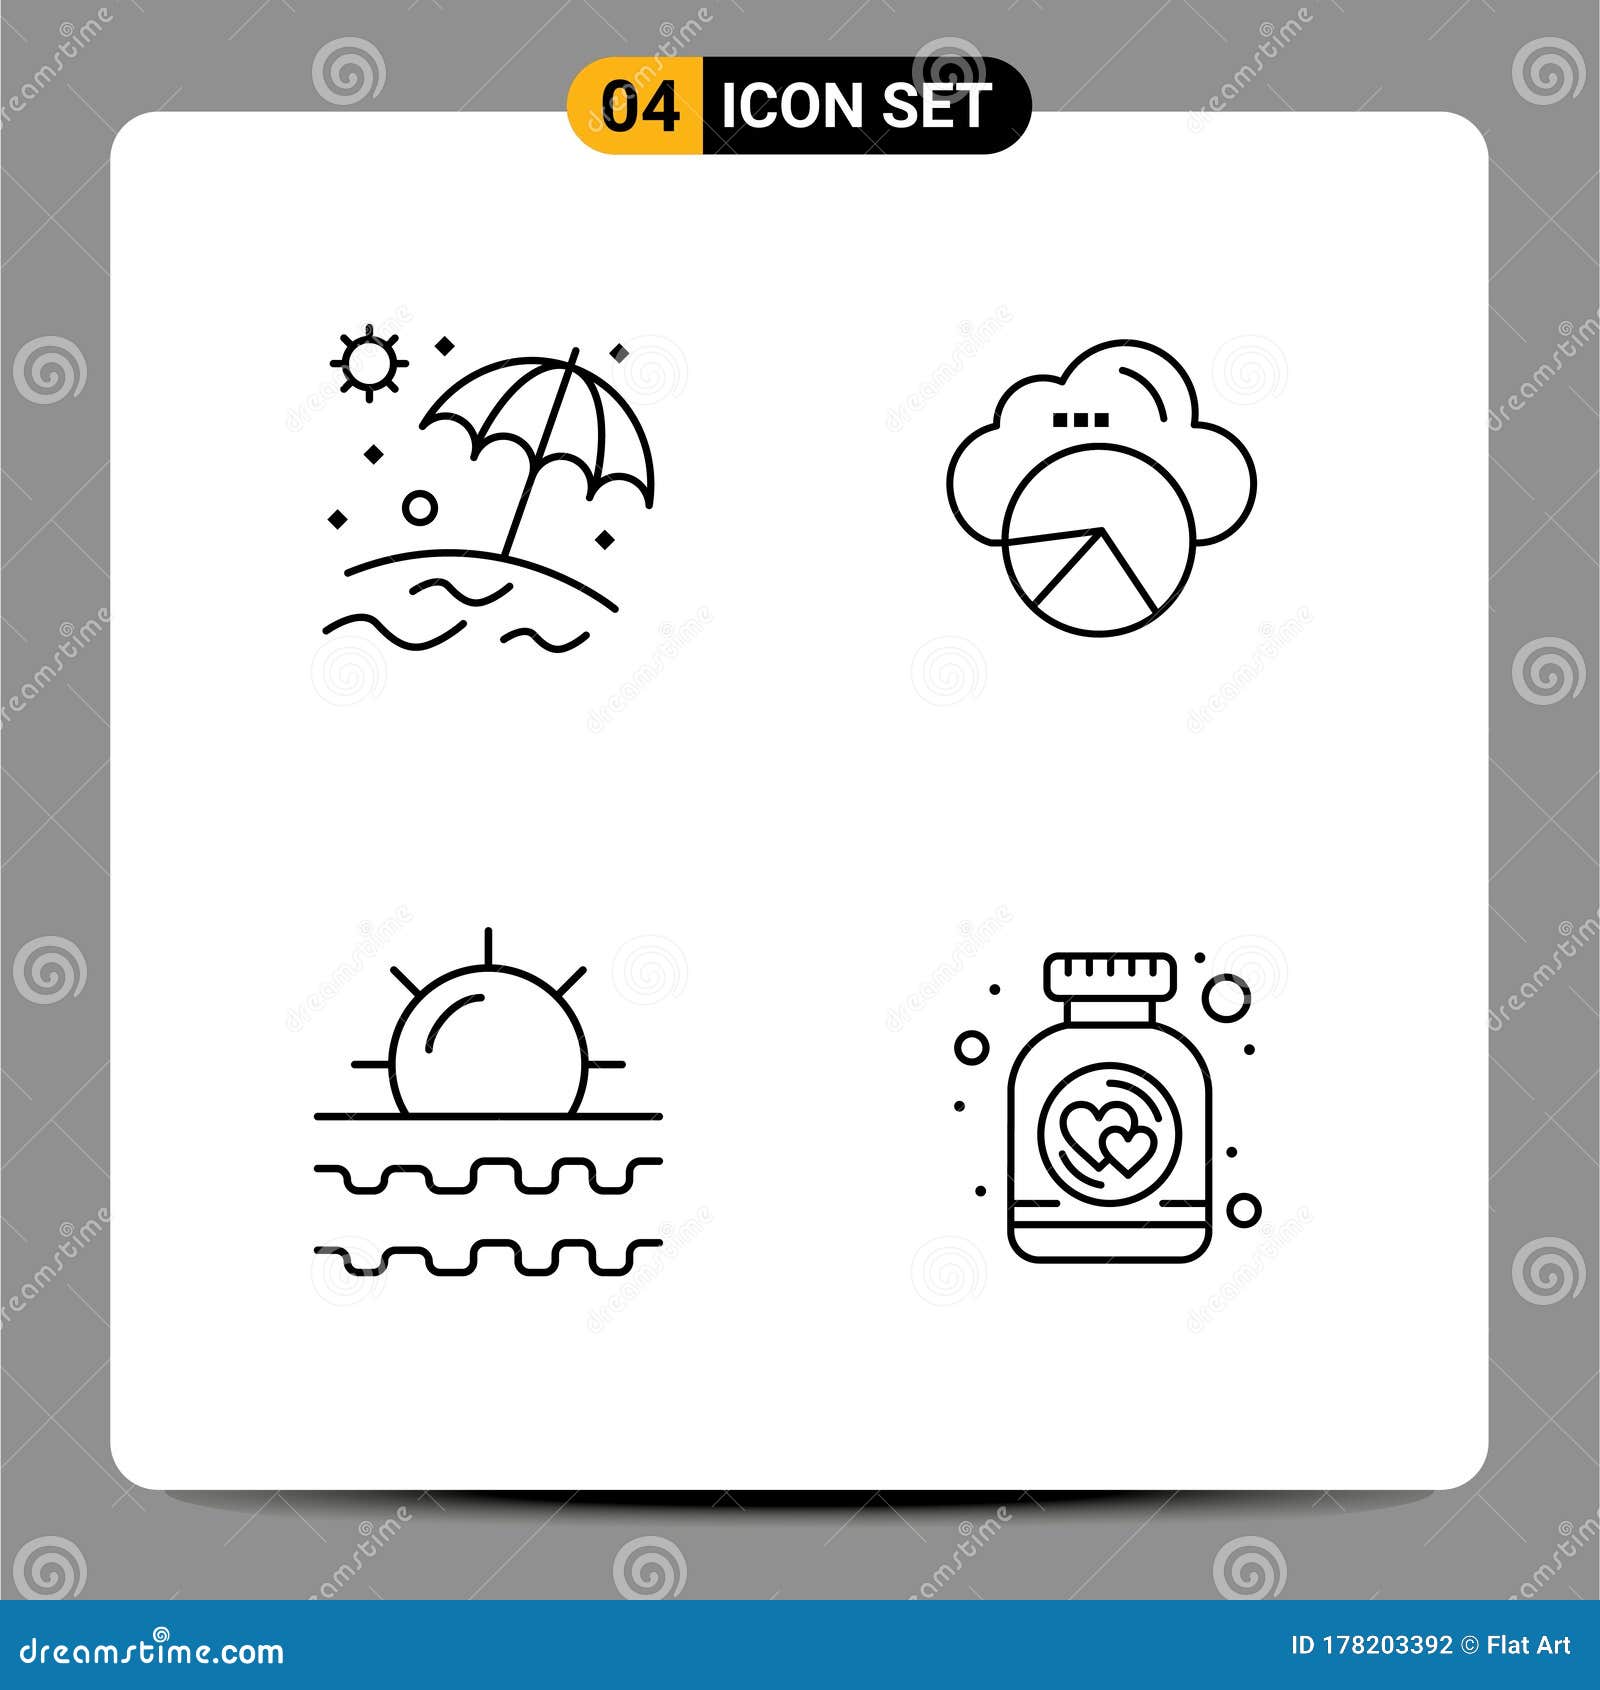 set of 4 modern ui icons s signs for beach, sun, reporting, cloud scince, vacation